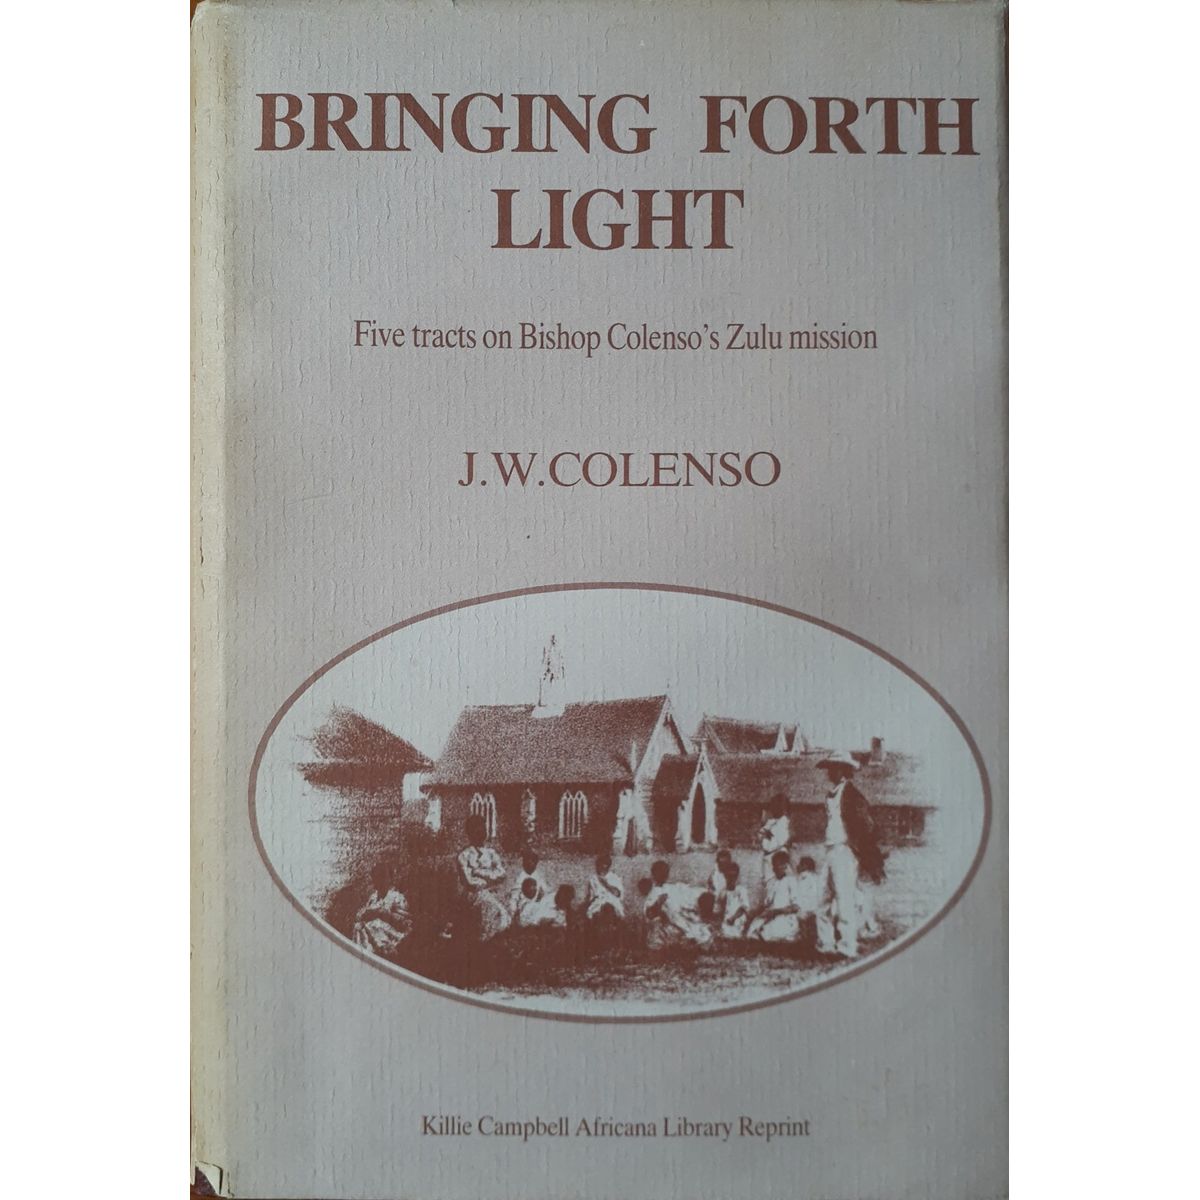 ISBN: 9780869802830 / 0869802836 - Bringing Forth Light by J.W. Colenso, edited by Ruth Edgecombe [1982]